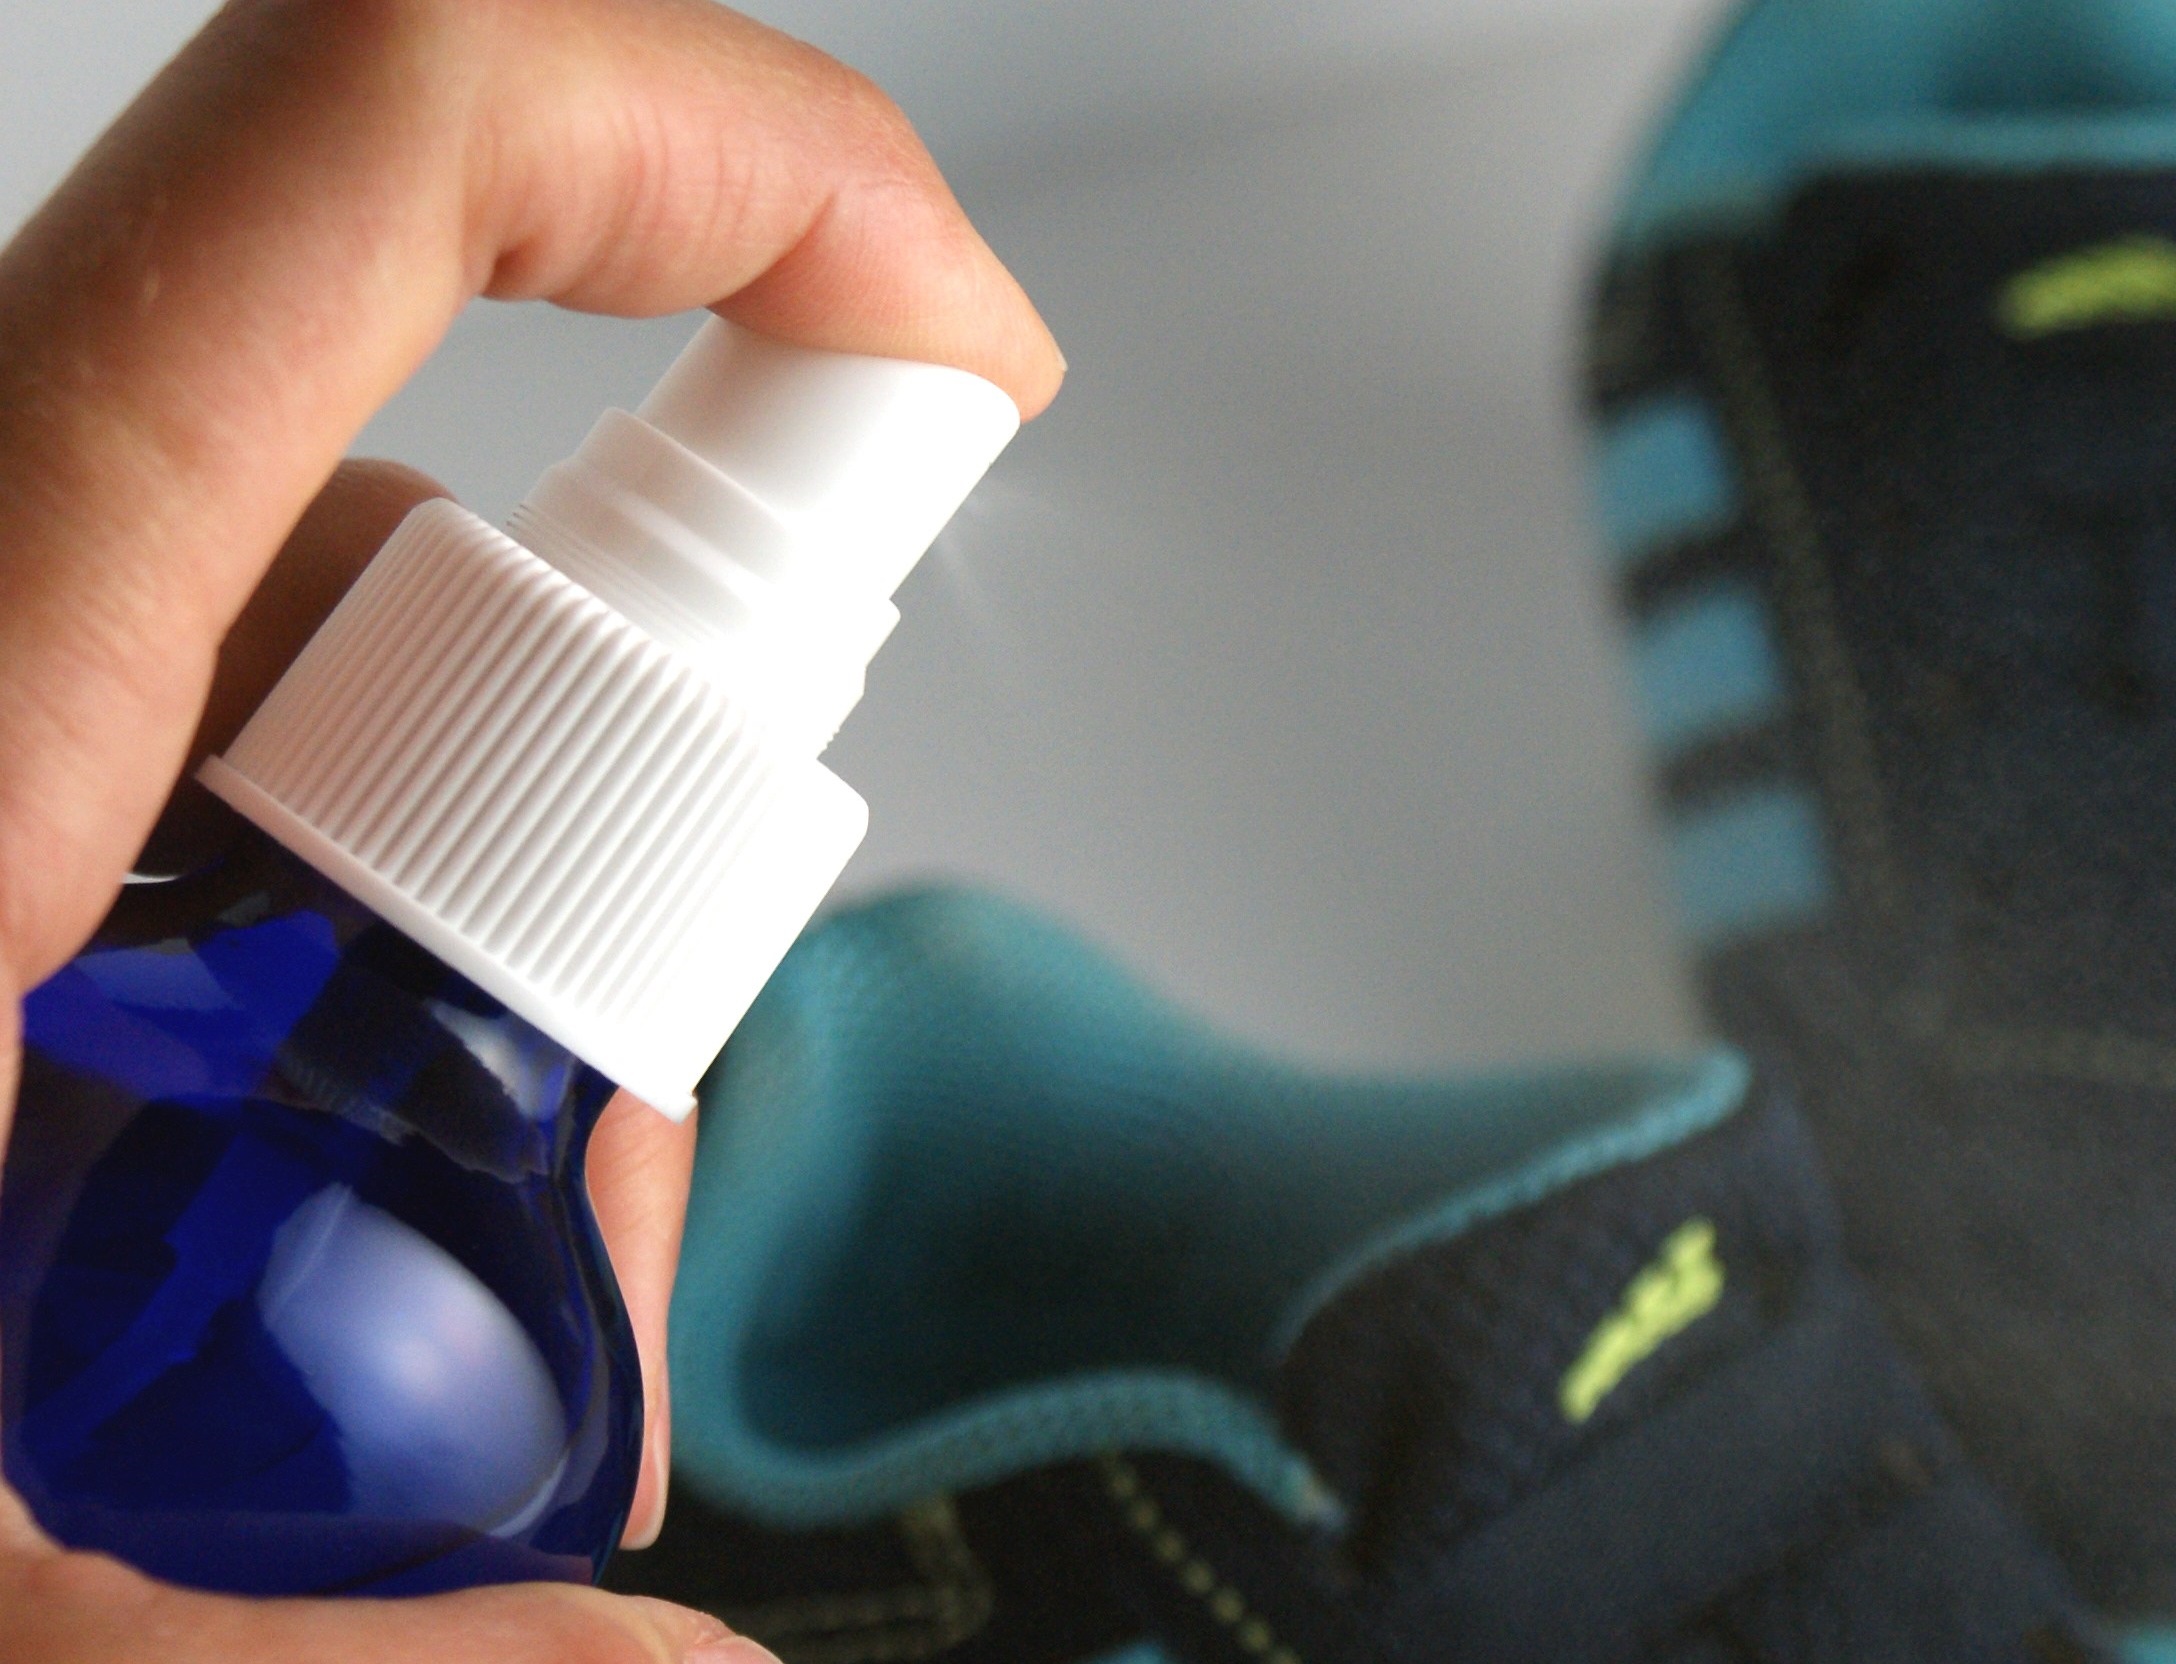 best shoe protector spray for leather